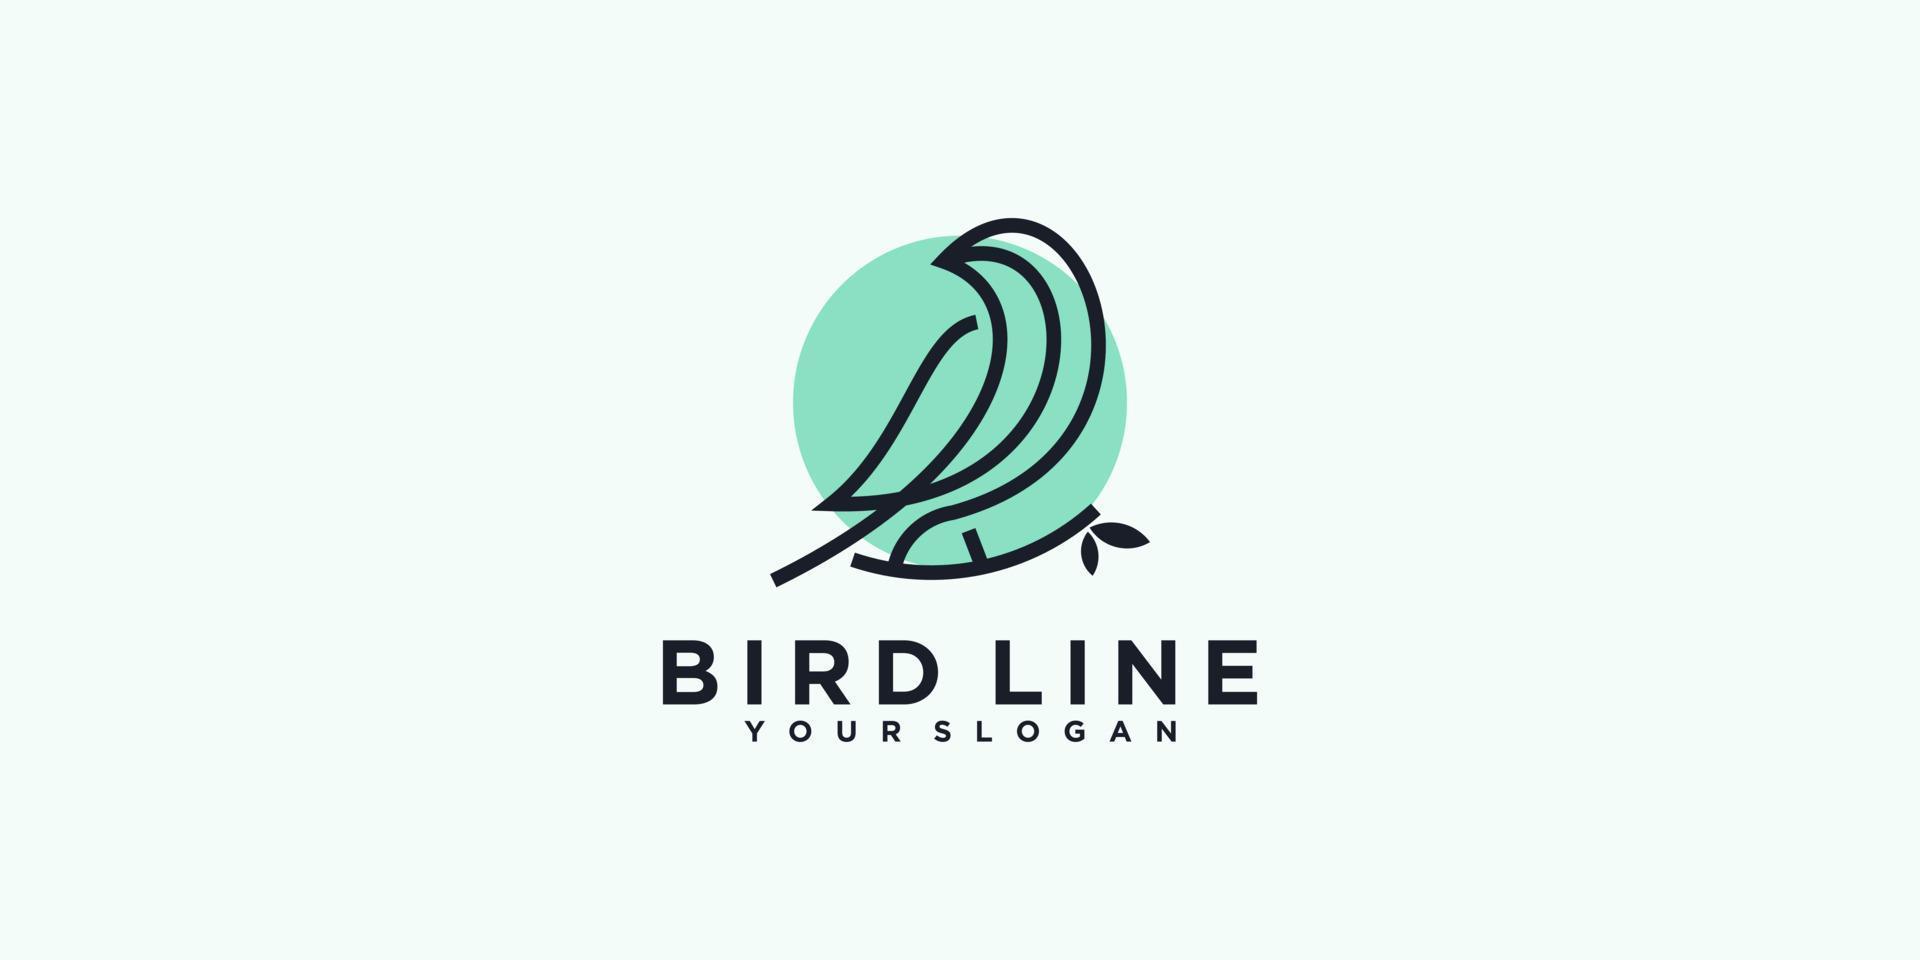 bird logo with line art, reference logo vector